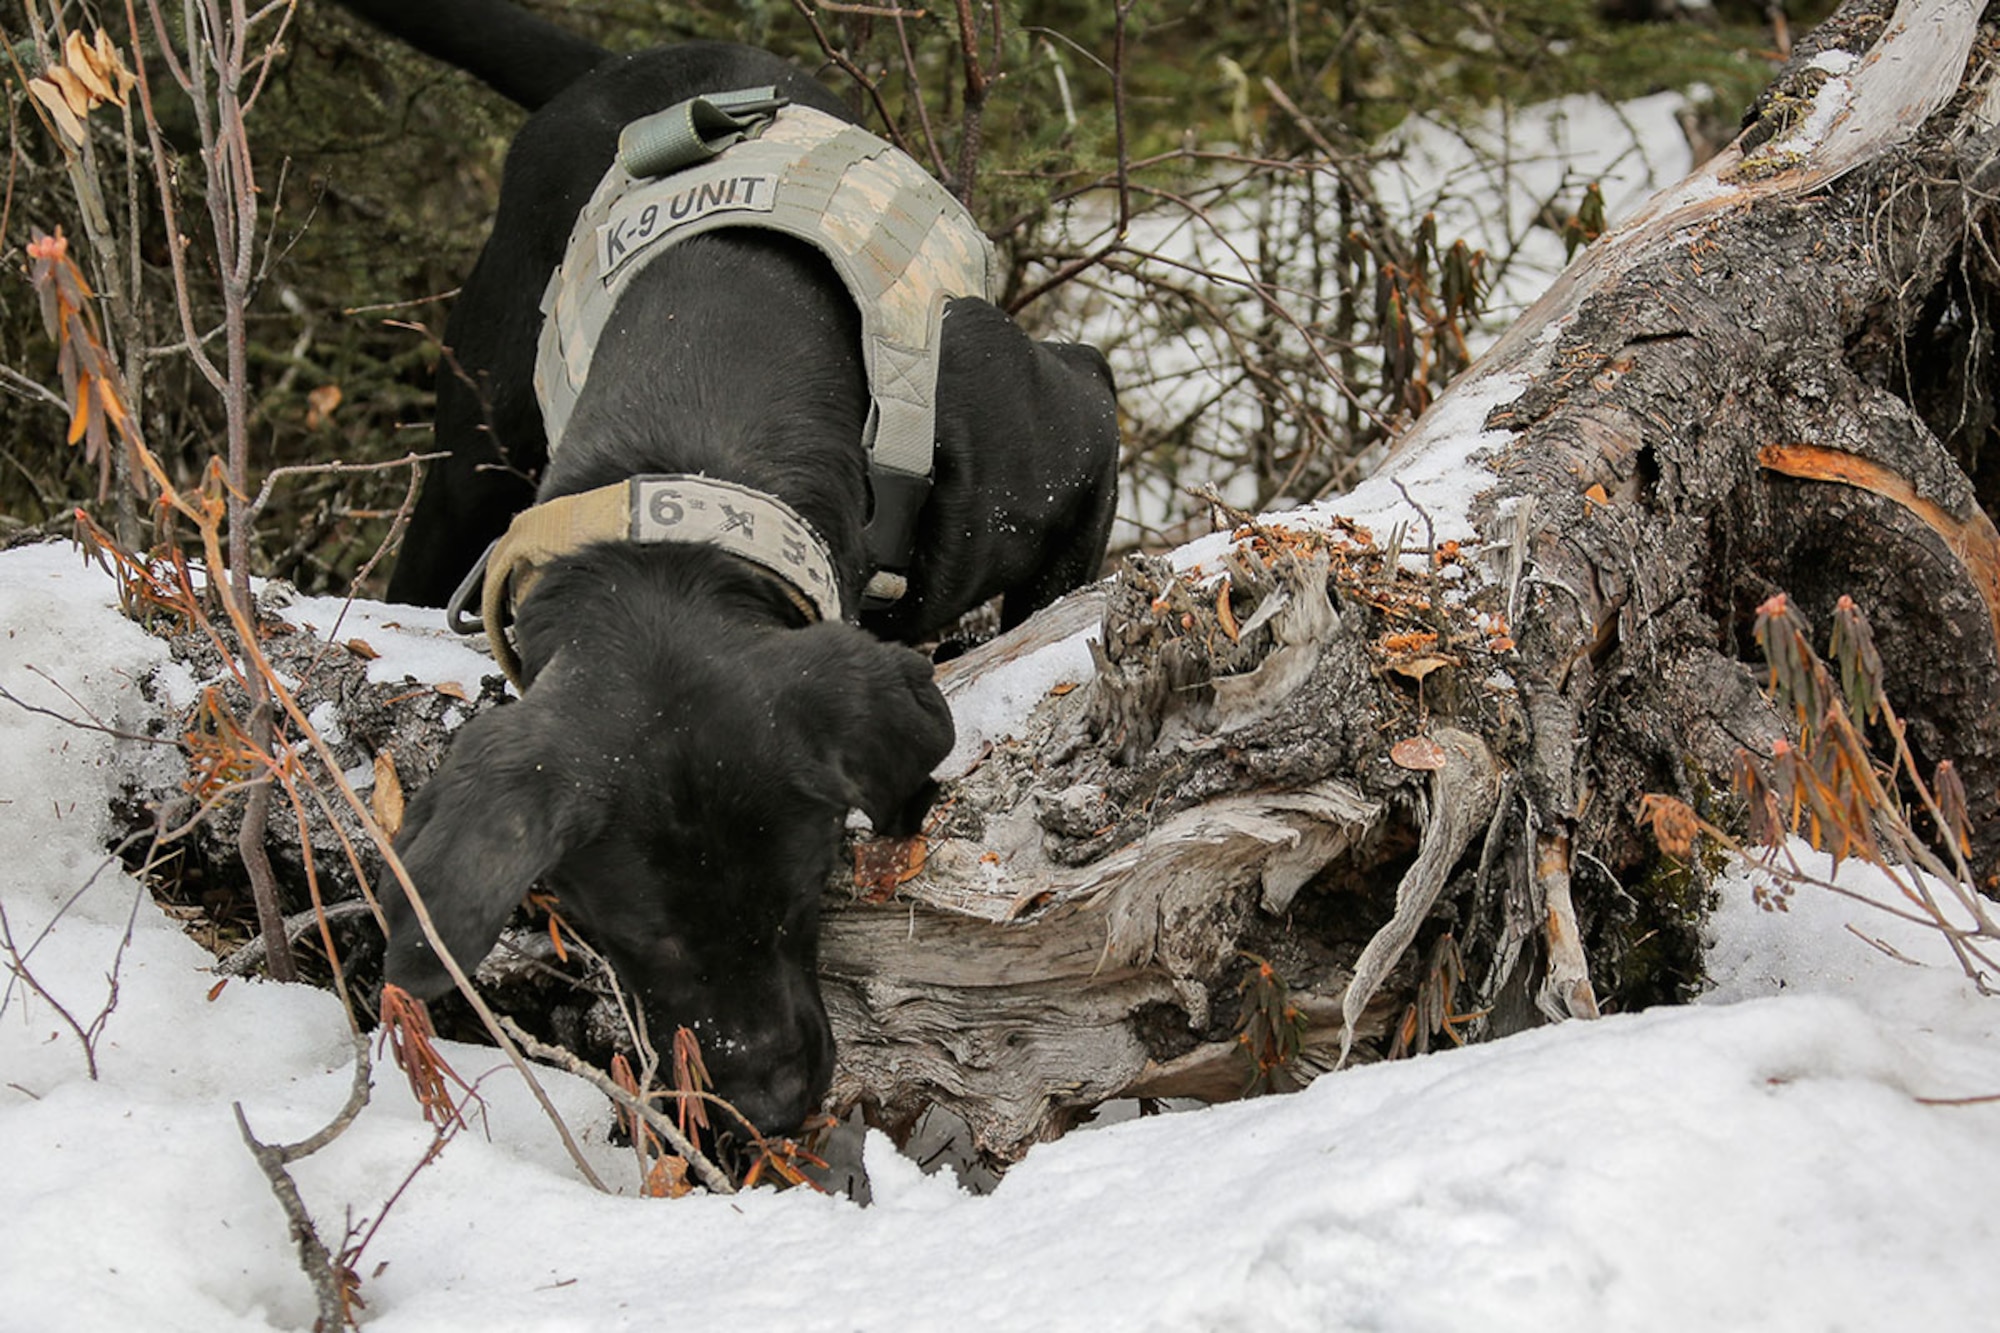 U.S. Army military working dog, Teddy, assigned to the 549th Military Working Dog Detachment, searches for simulated hidden explosives while conducting K-9 training at Joint Base Elmendorf-Richardson, Alaska, March 17, 2016. Military working dogs are trained to respond to various law enforcement emergencies as well as detect hidden narcotics and explosives. (U.S. Air Force photo/Alejandro Peña)